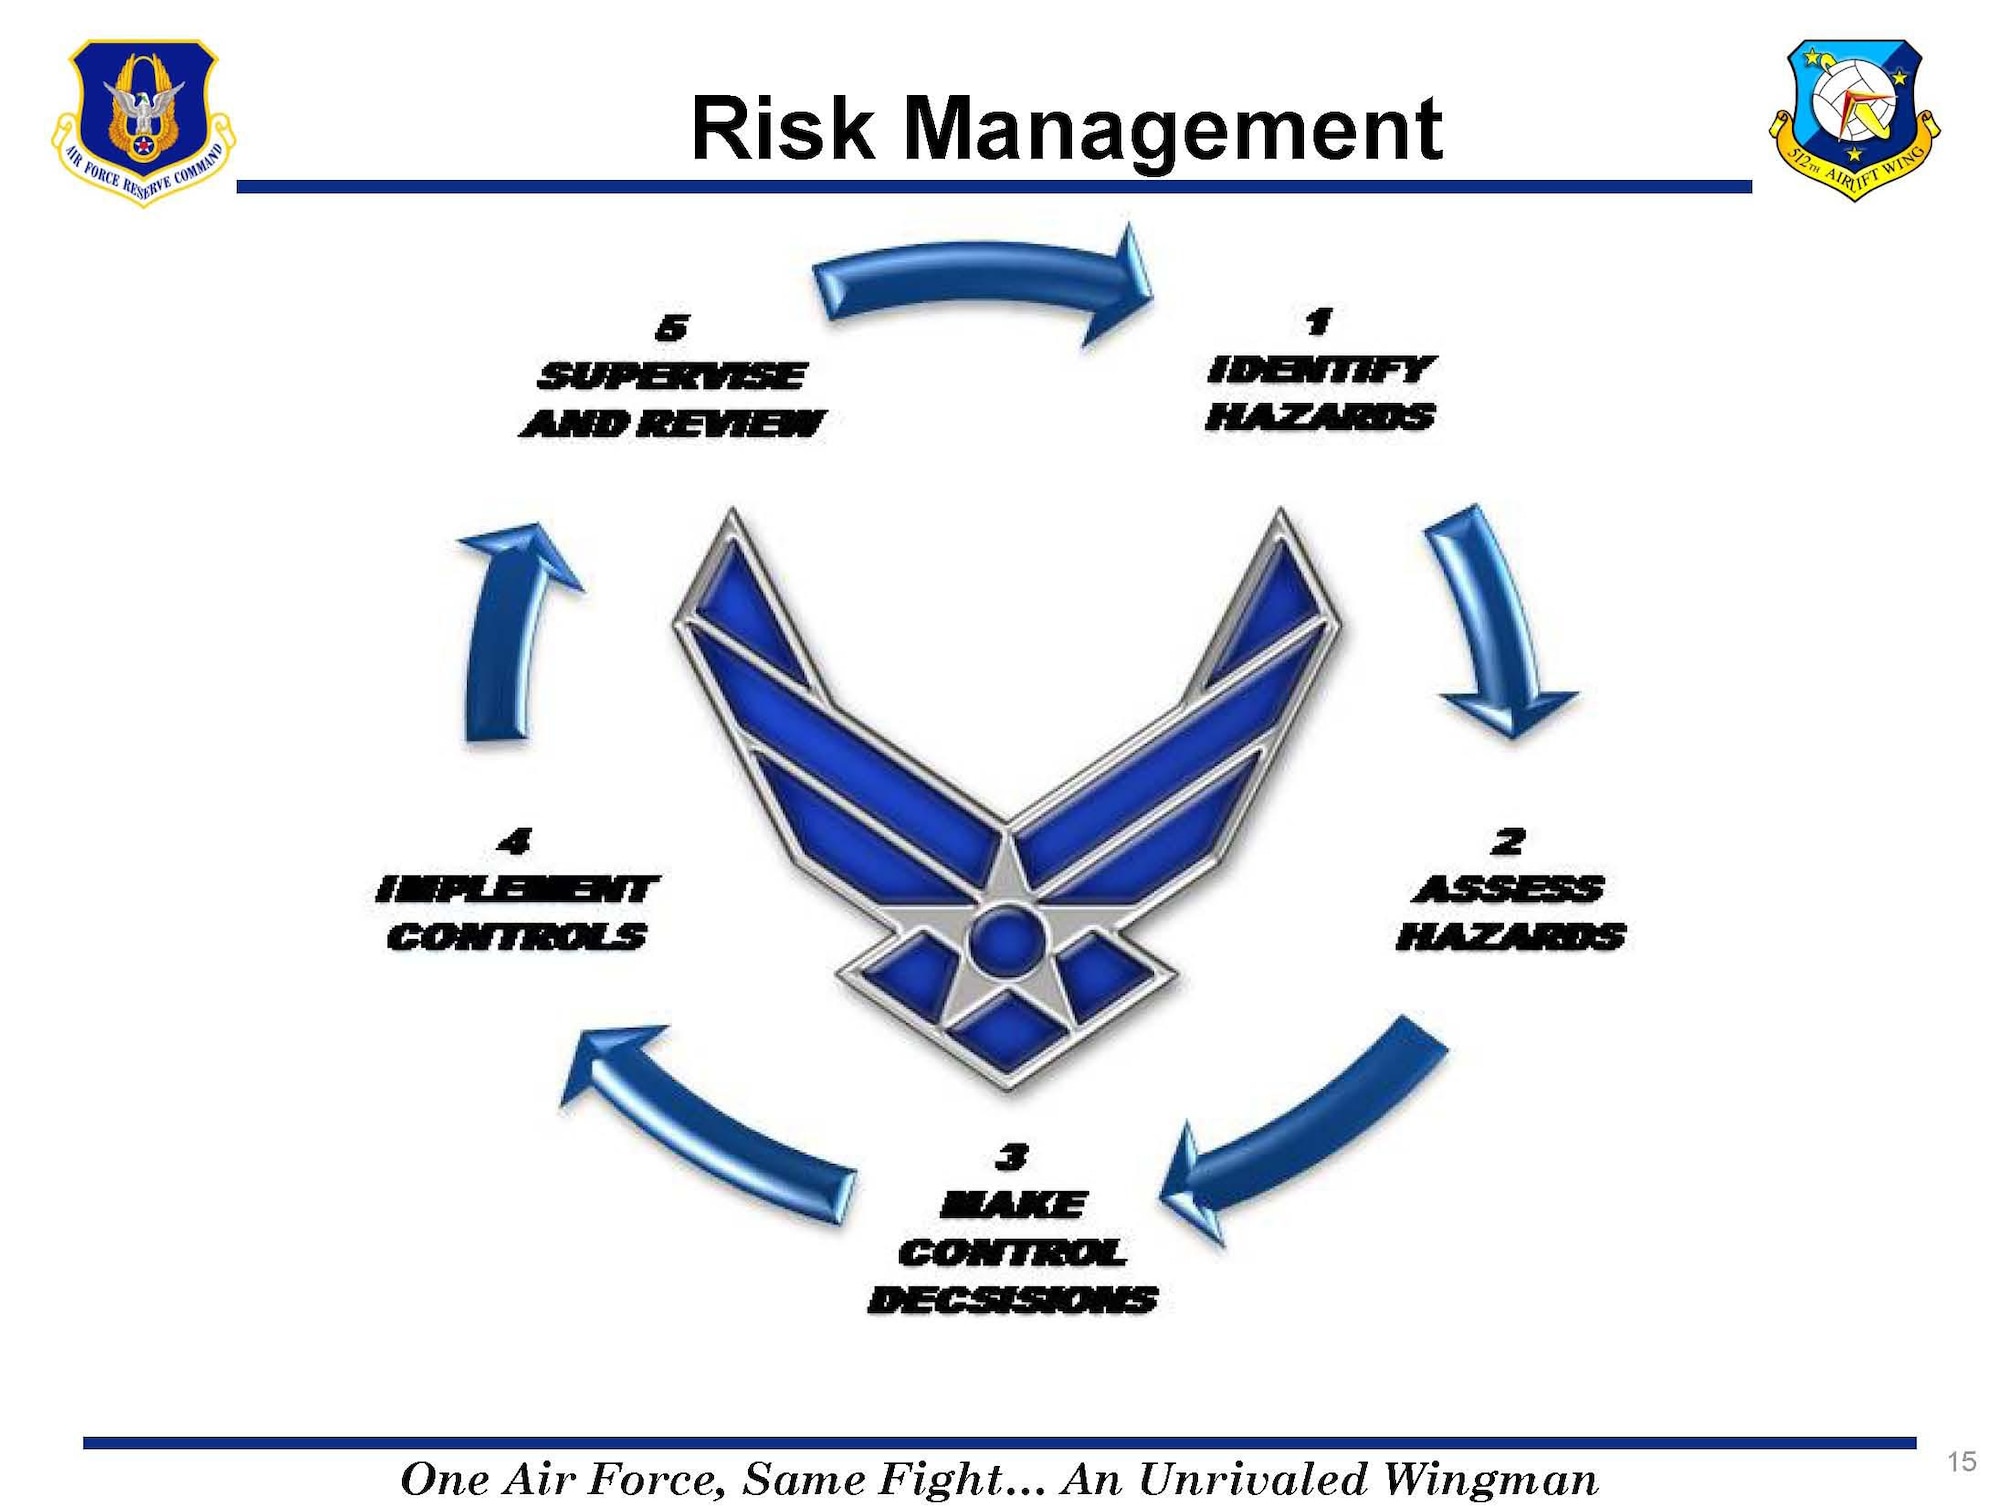 The U.S. Air Force is adopting a five-step risk management cycle to replace the former six-step cycle. The changes will be reflected in the updated Air Force Instruction 90-901, Operational Risk Management.